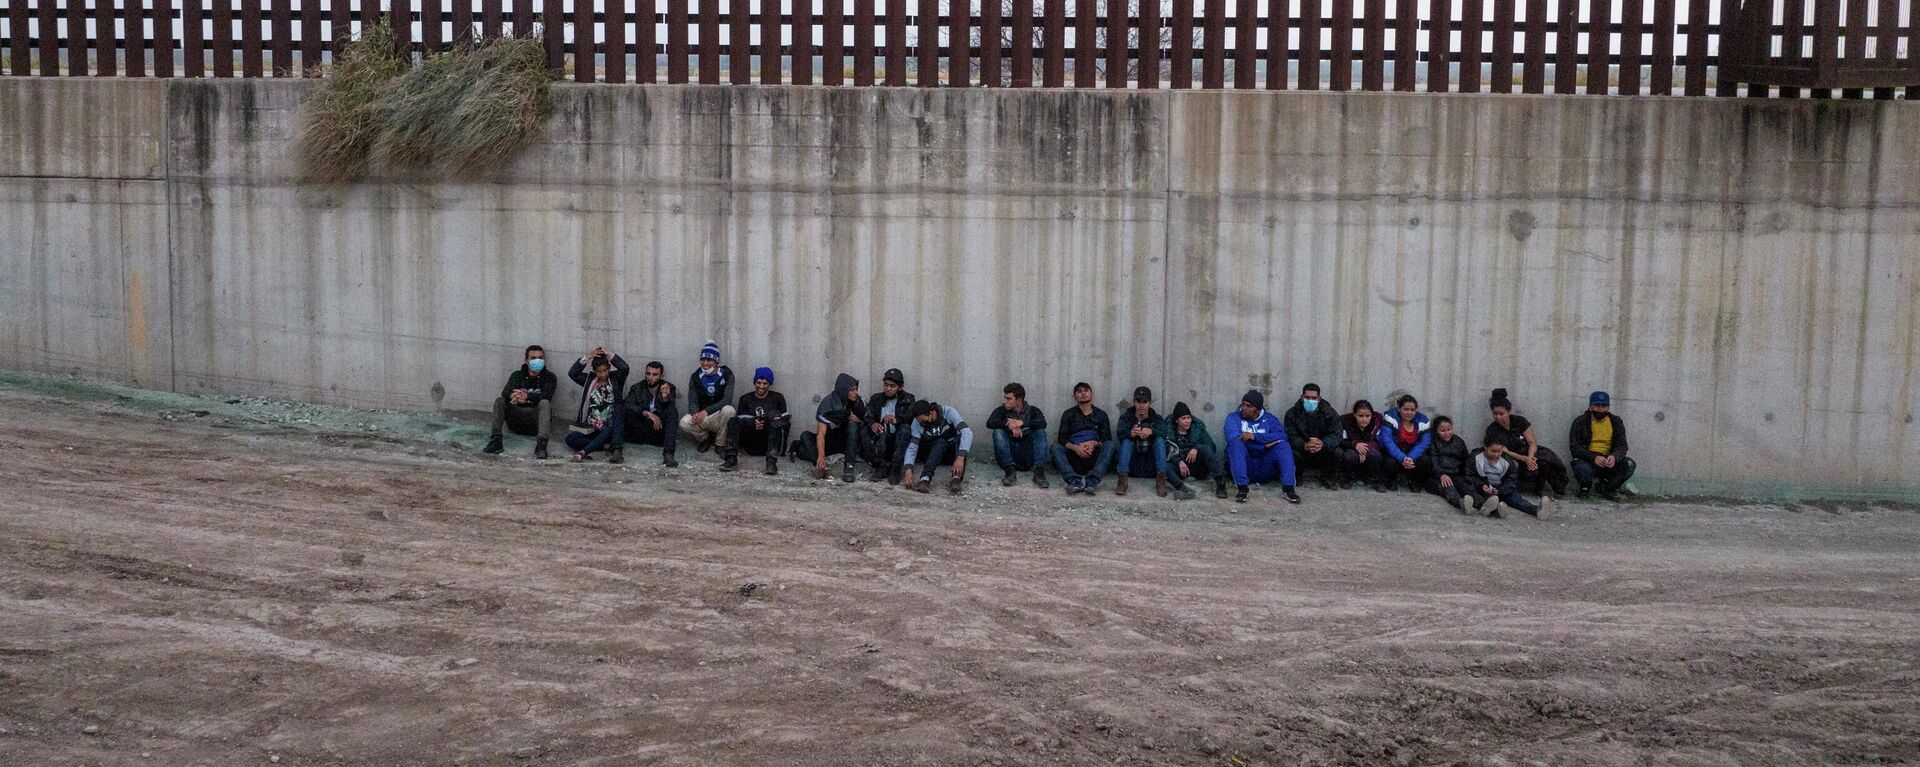 Asylum seeking migrants from Central America line up near the border wall as they await to be processed by agents after crossing the Rio Grande river into the United States from Mexico in Penitas, Texas, U.S., February 23, 2022. Picture taken with a drone. - Sputnik International, 1920, 18.03.2022